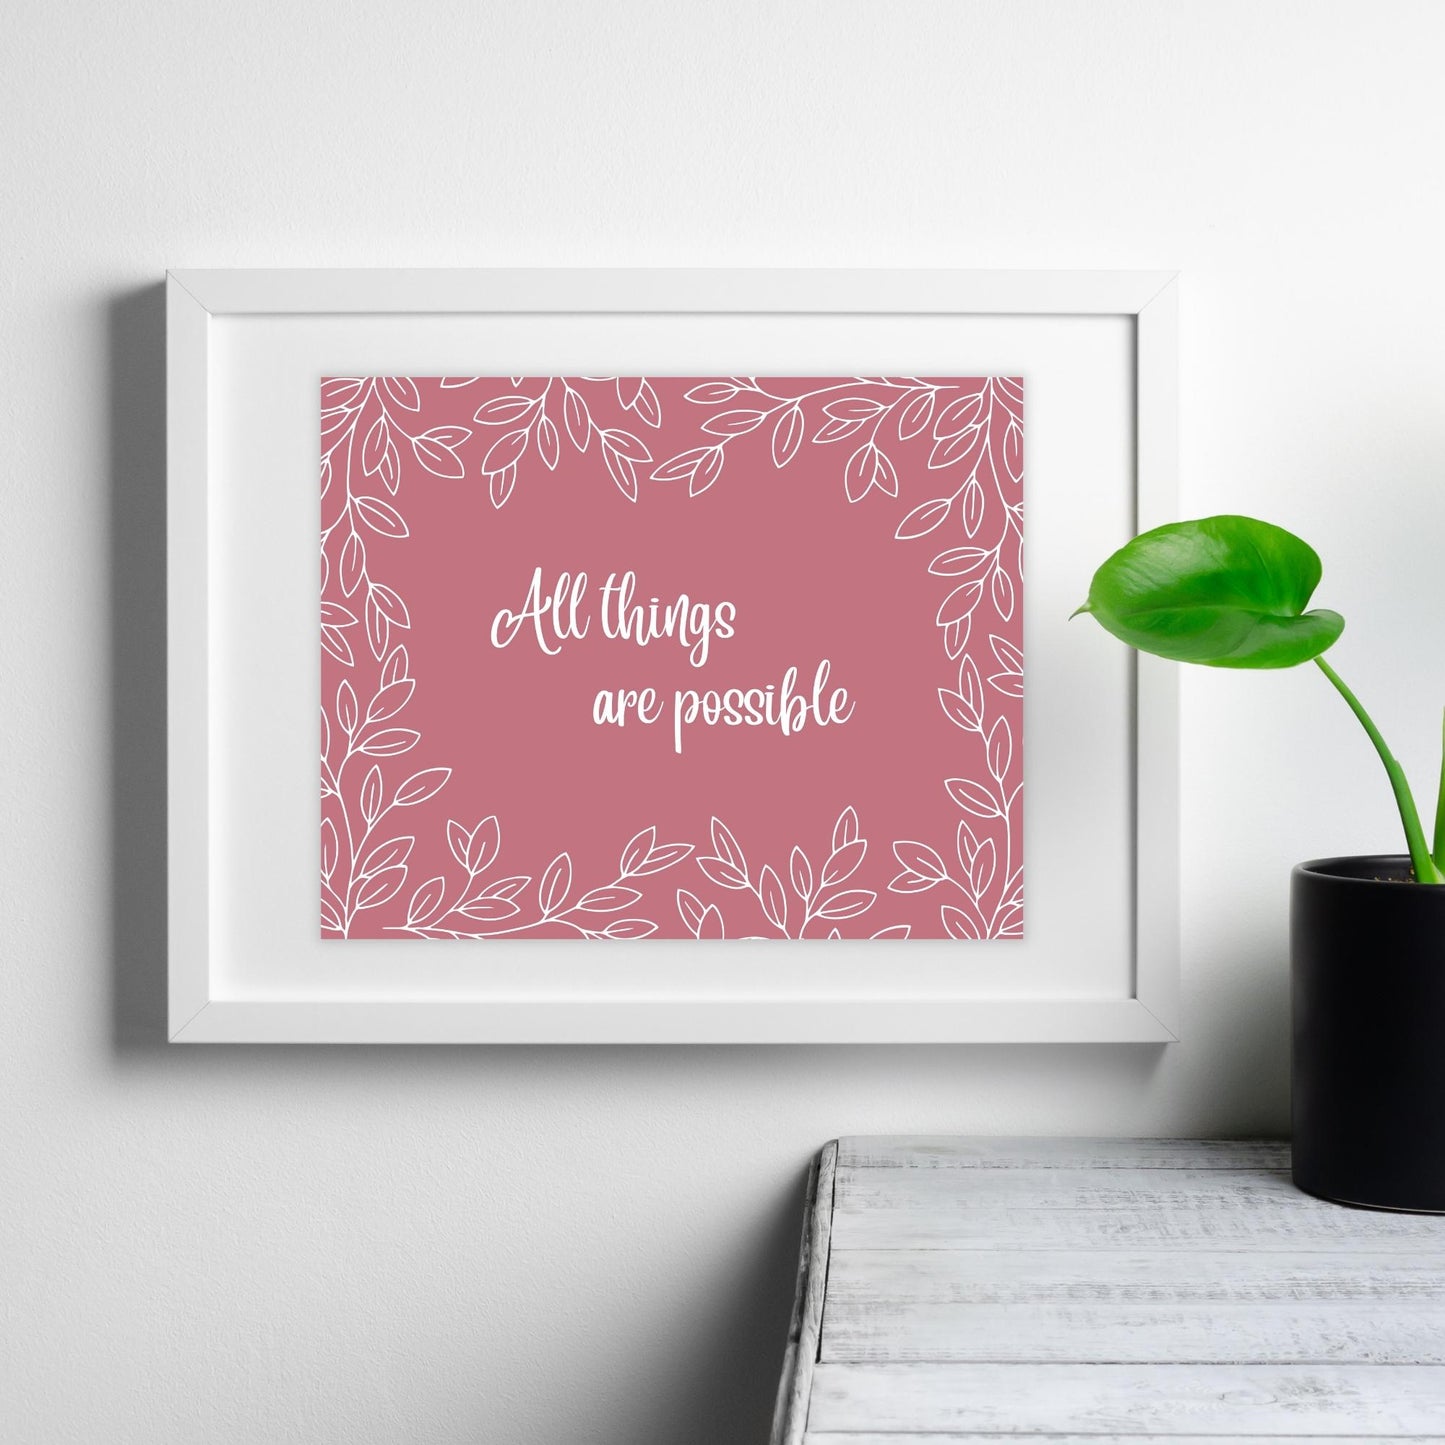 Inspirational Word Art - All things are possible - Leaf Design Wall Decor (10x8 print) choose from 5 colors | Rose Mauve shown in white frame | oak7west.com